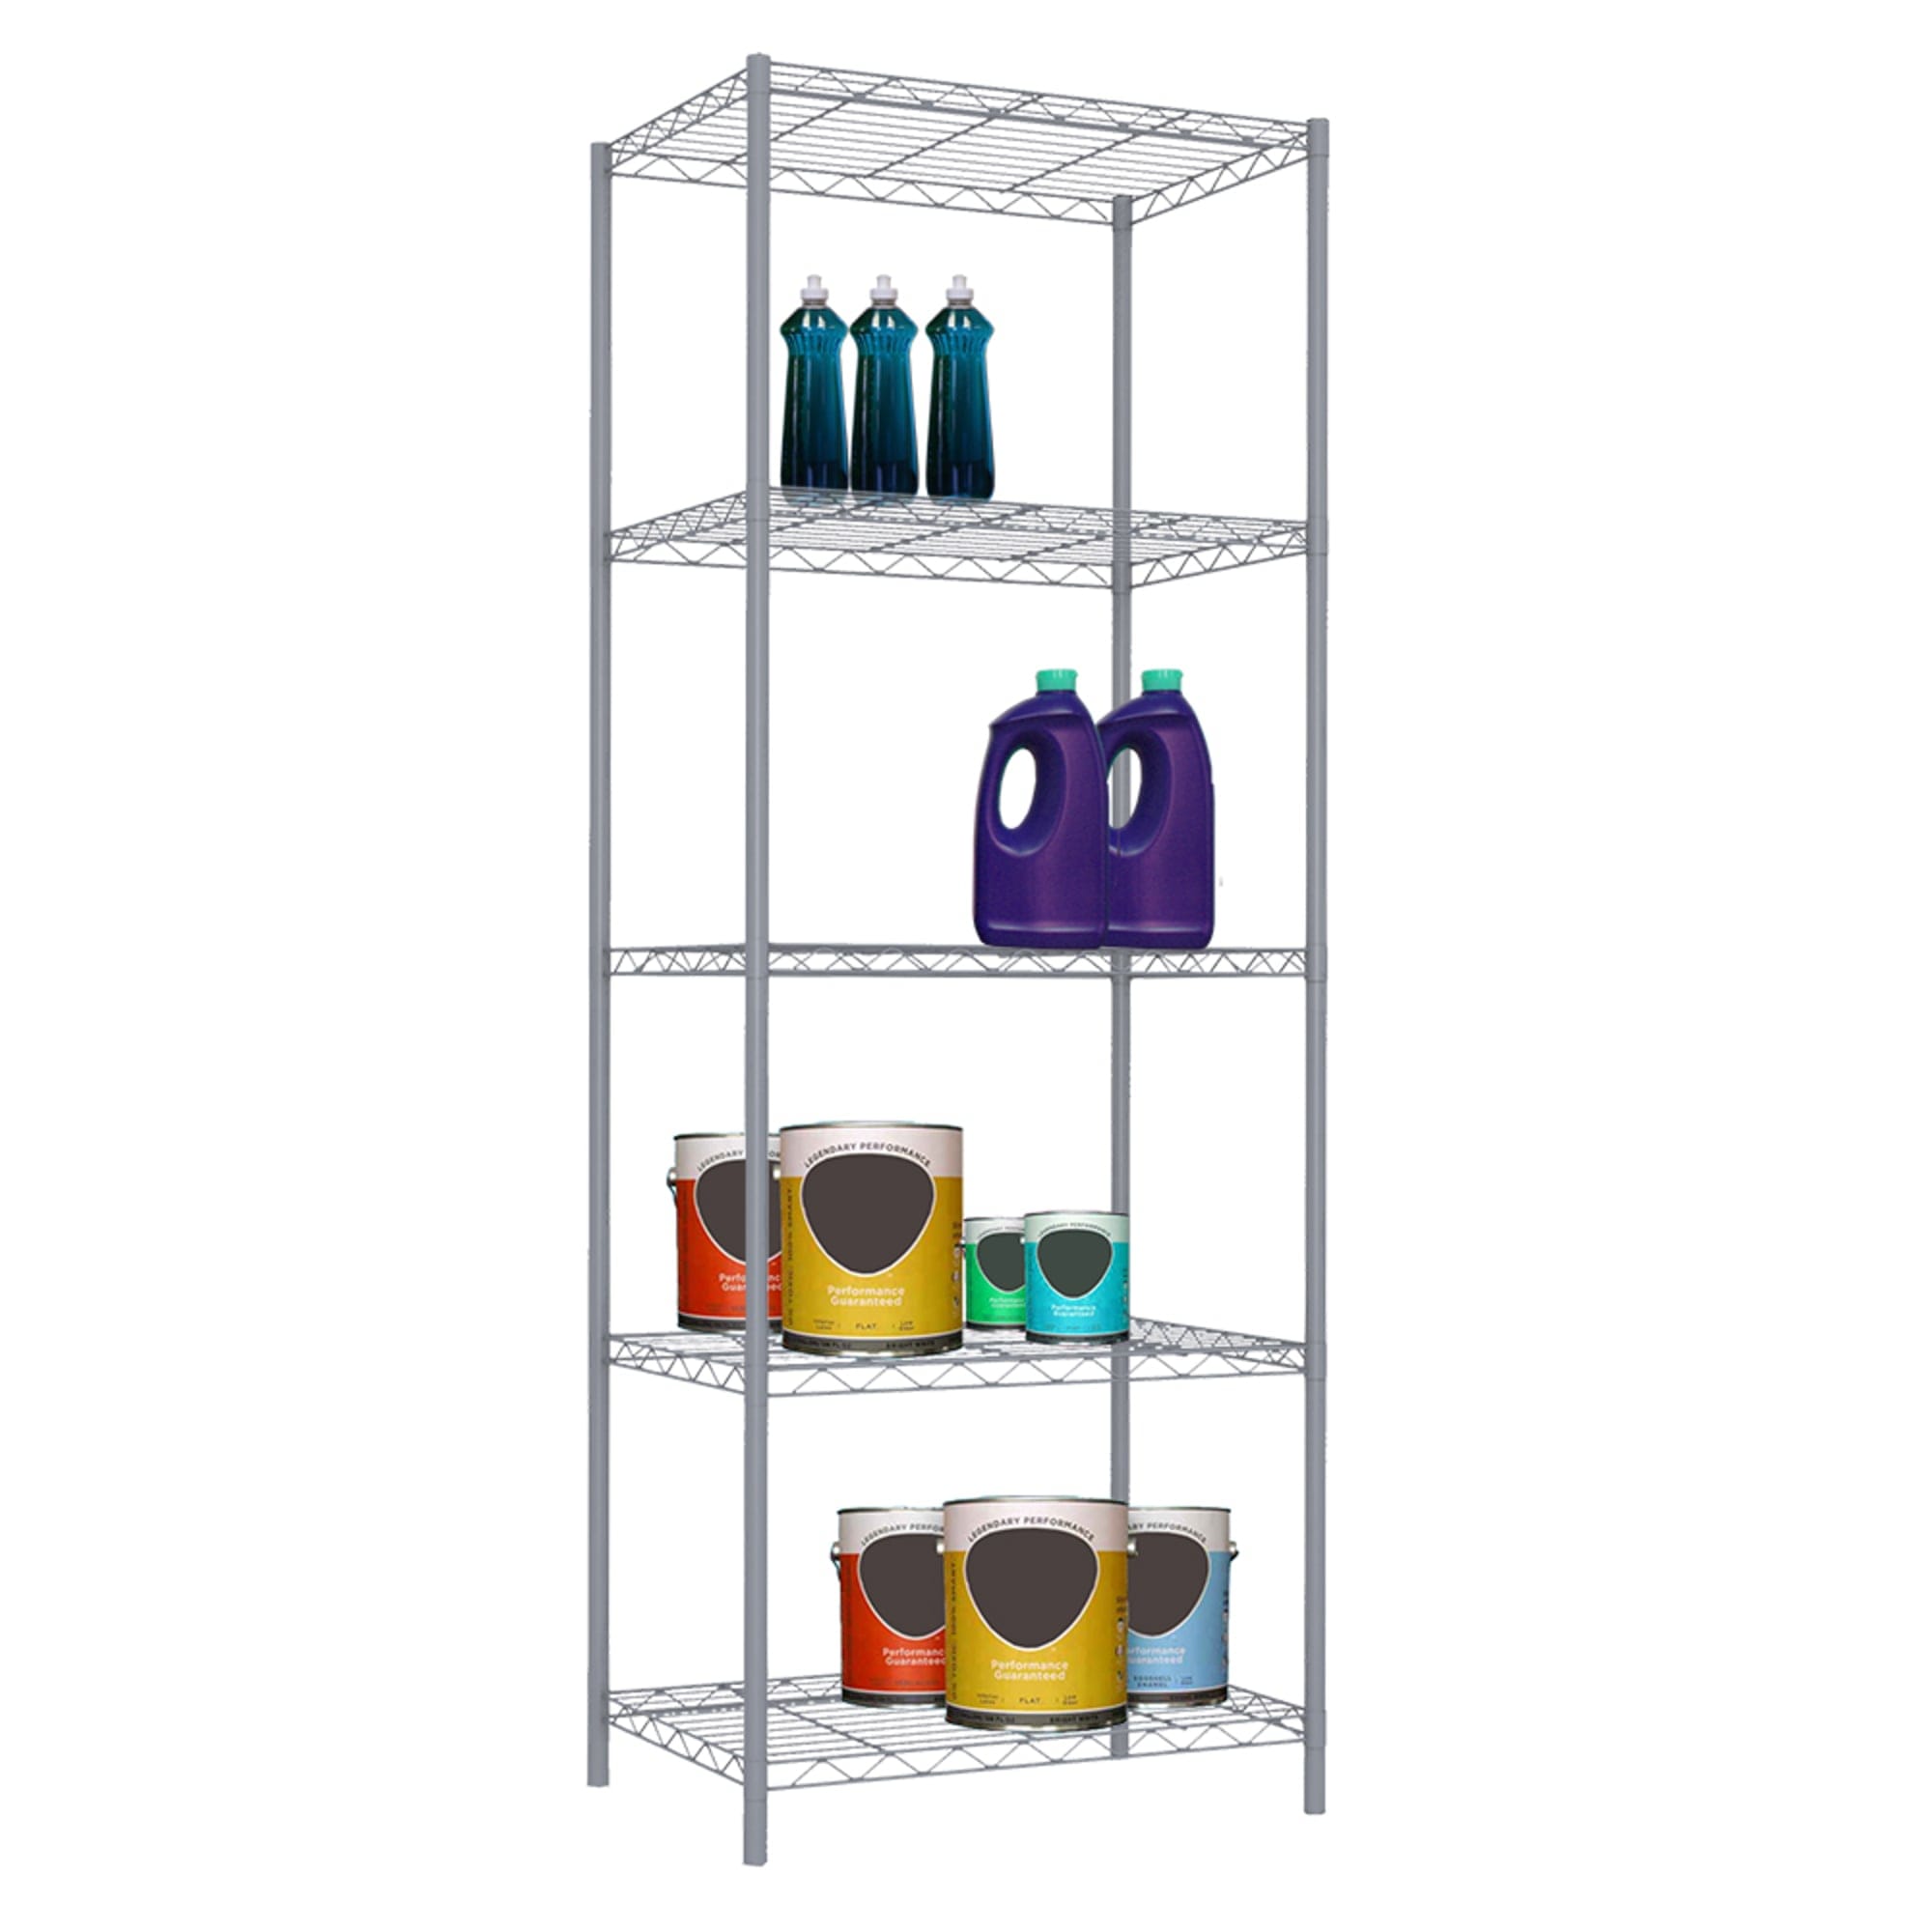 Home Basics 5 Tier Metal Wire Shelf, Grey $50.00 EACH, CASE PACK OF 4